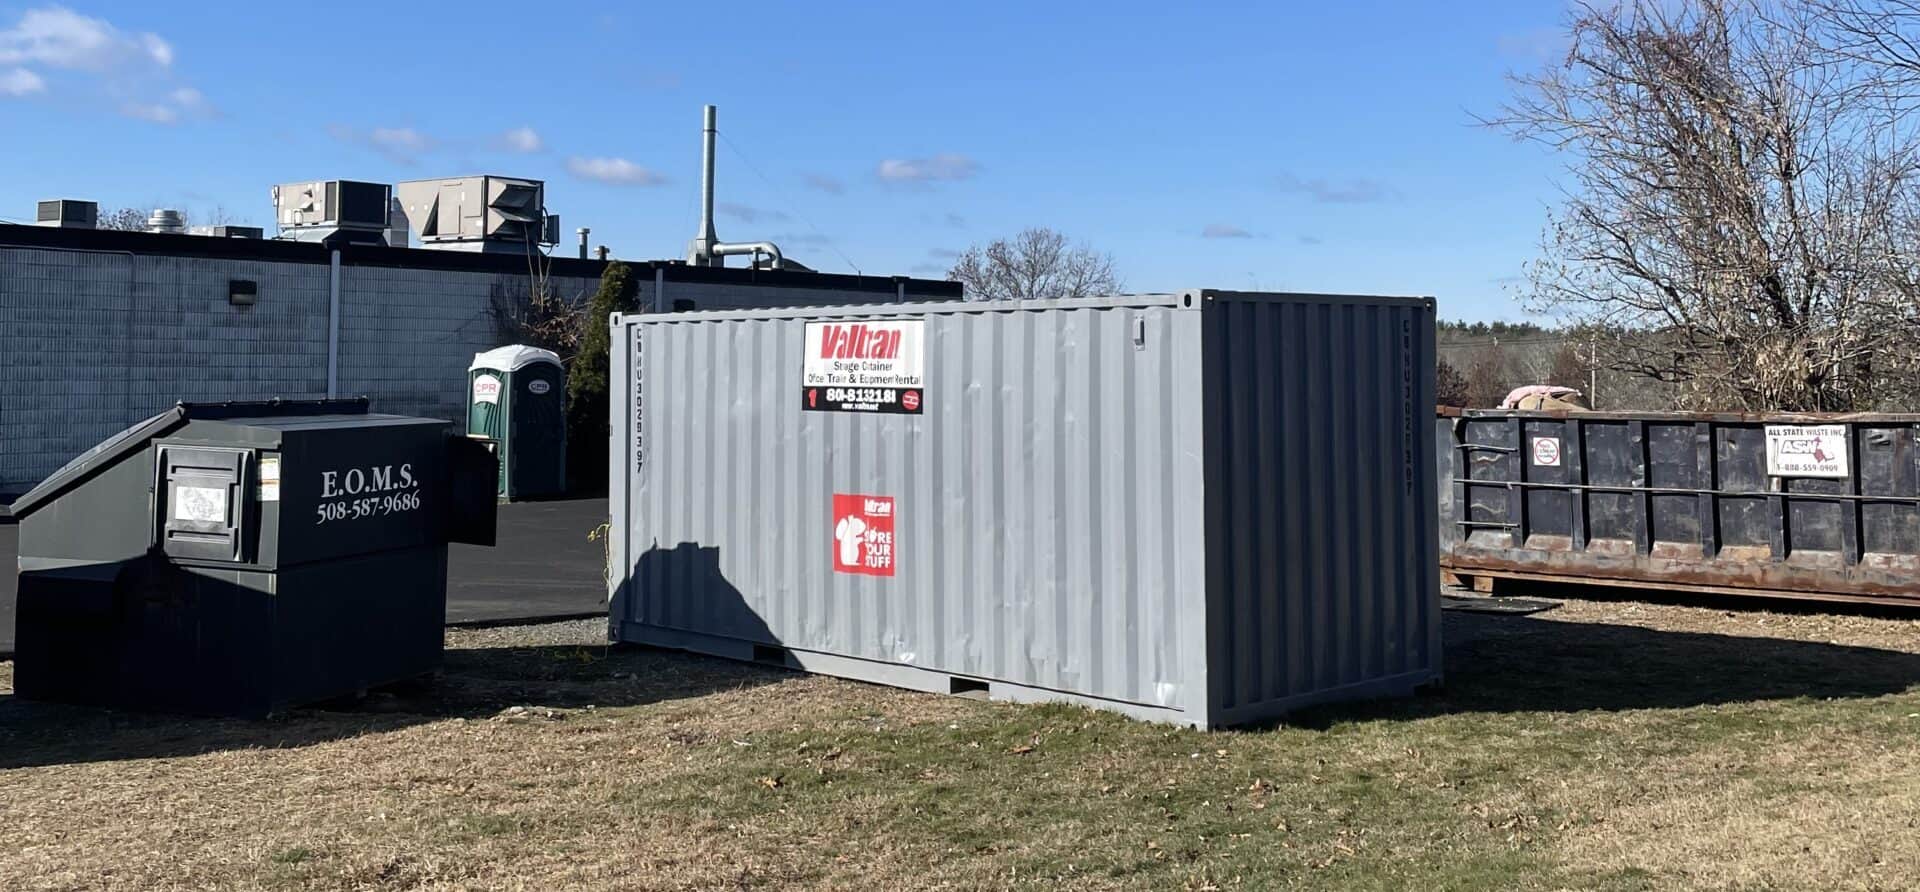 A Valtran storage container placed conveniently at the back of an office building near dumpsters and a portable toilet, representing its use for business storage needs.